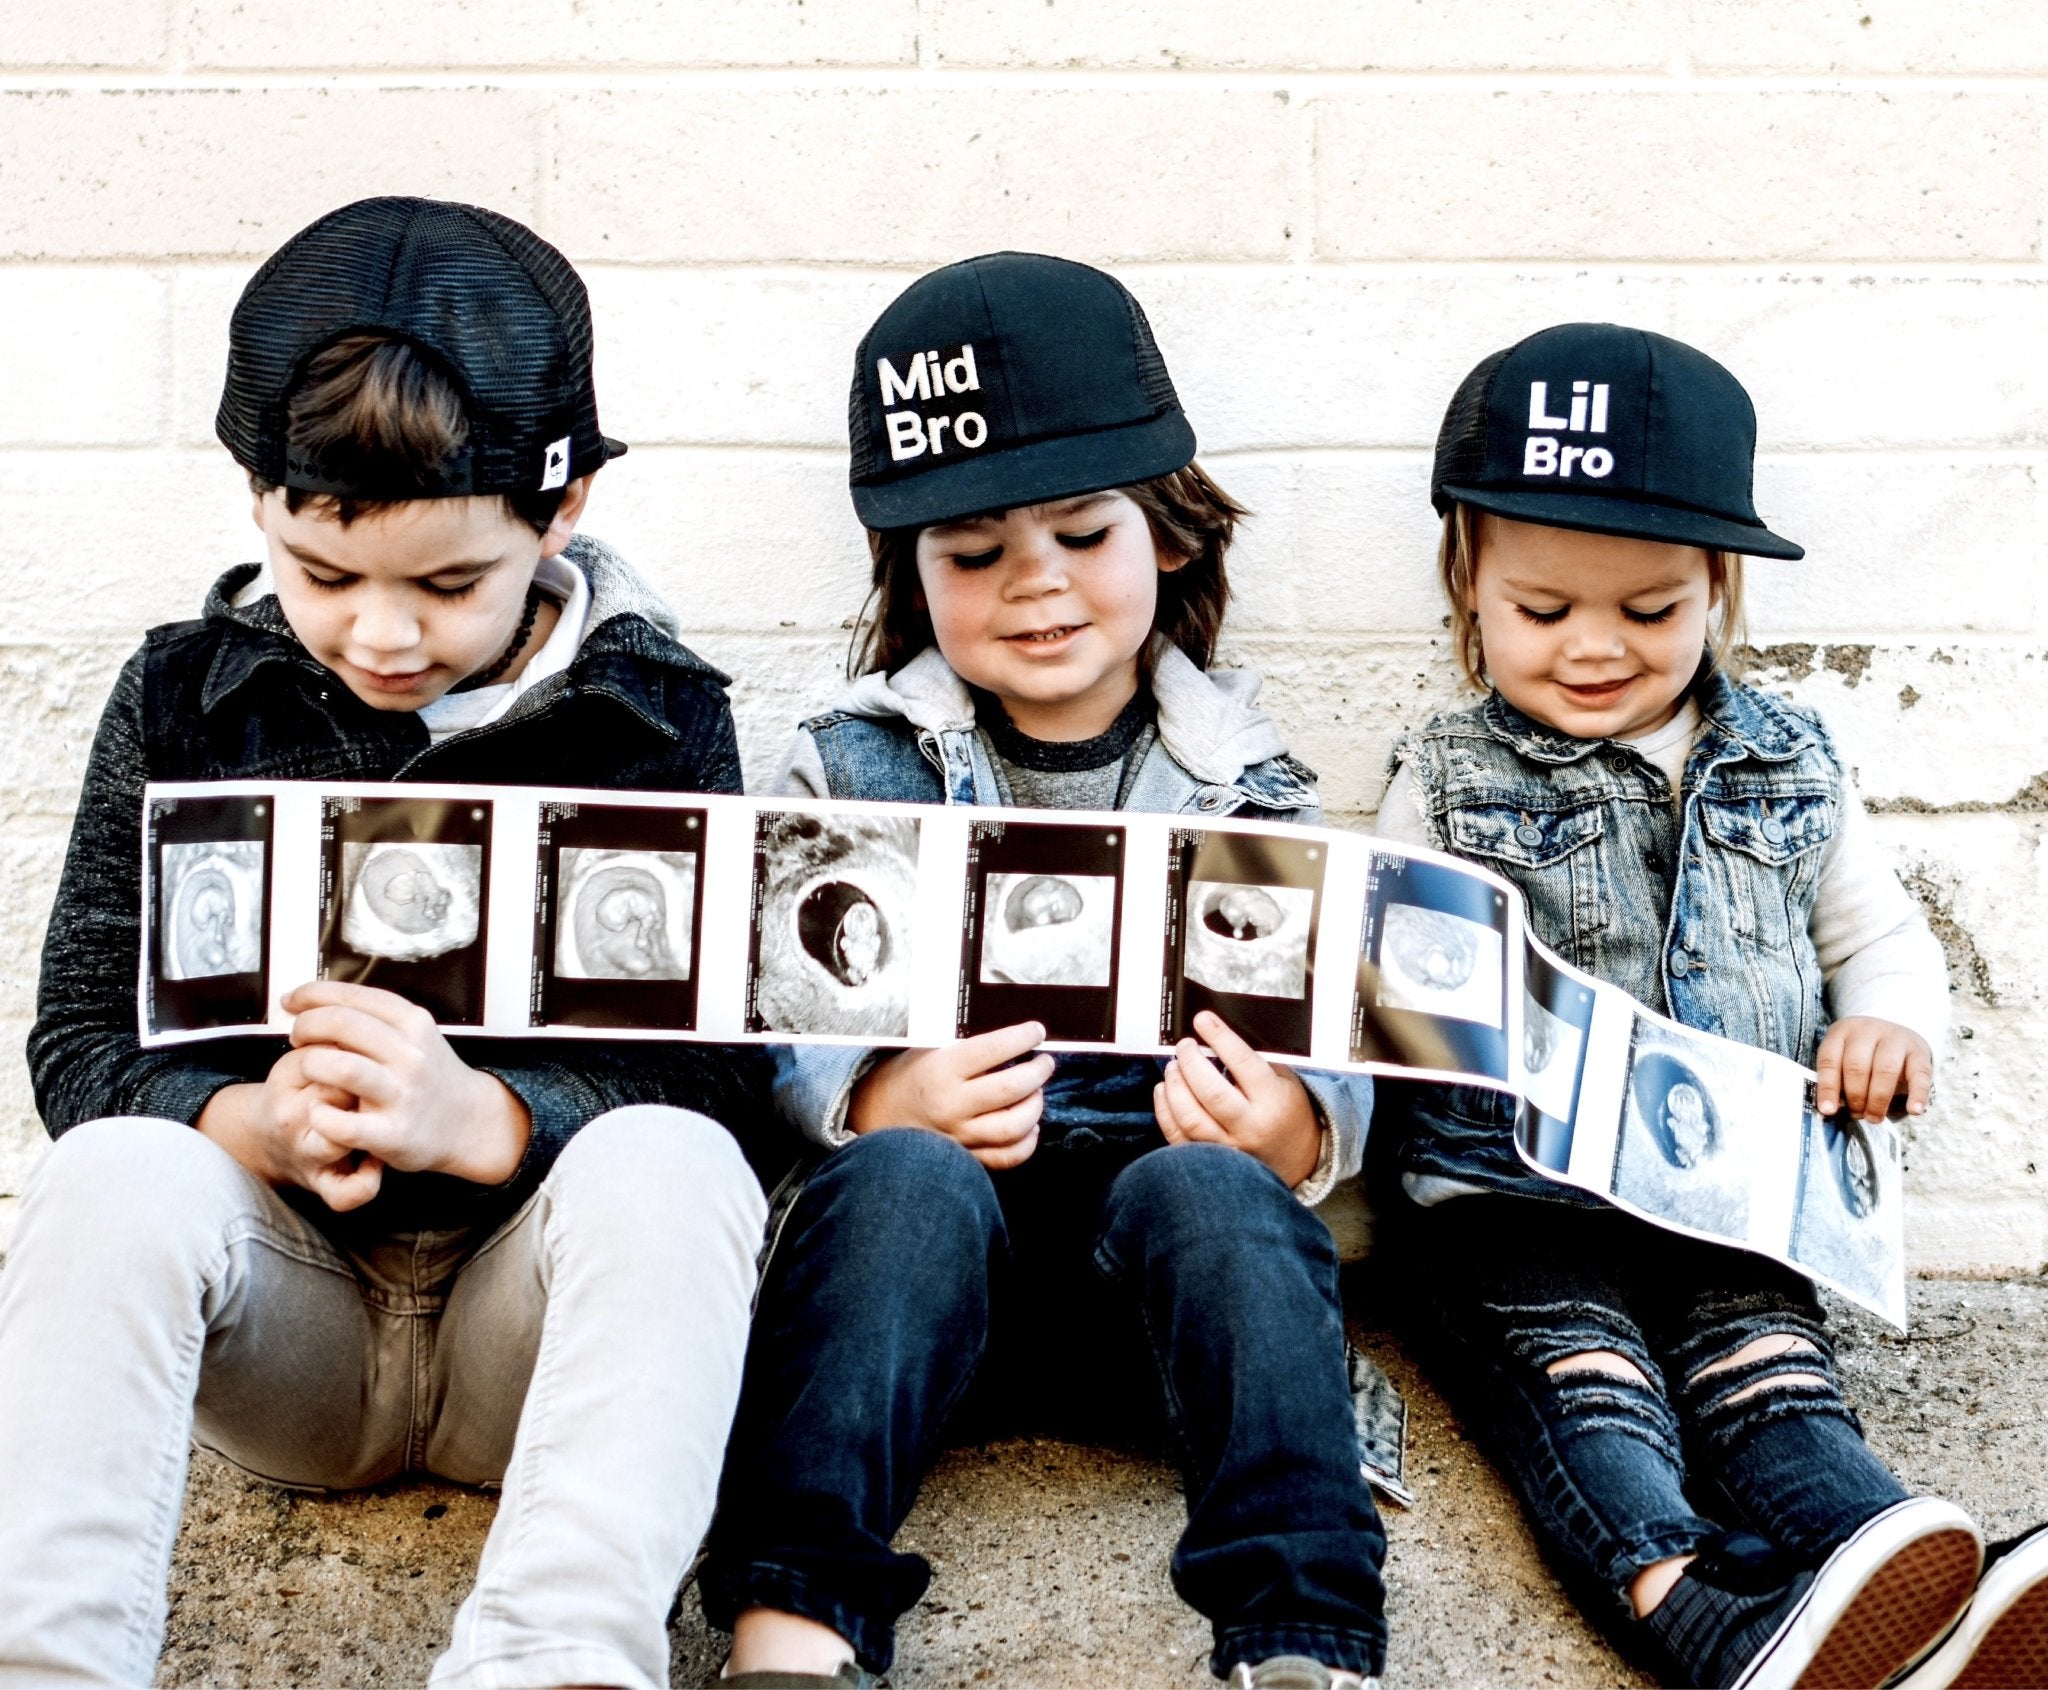 Picture of three boys in lil bro trucker, mid bro trucker, and big boy trucker hats holding an ultrasound image